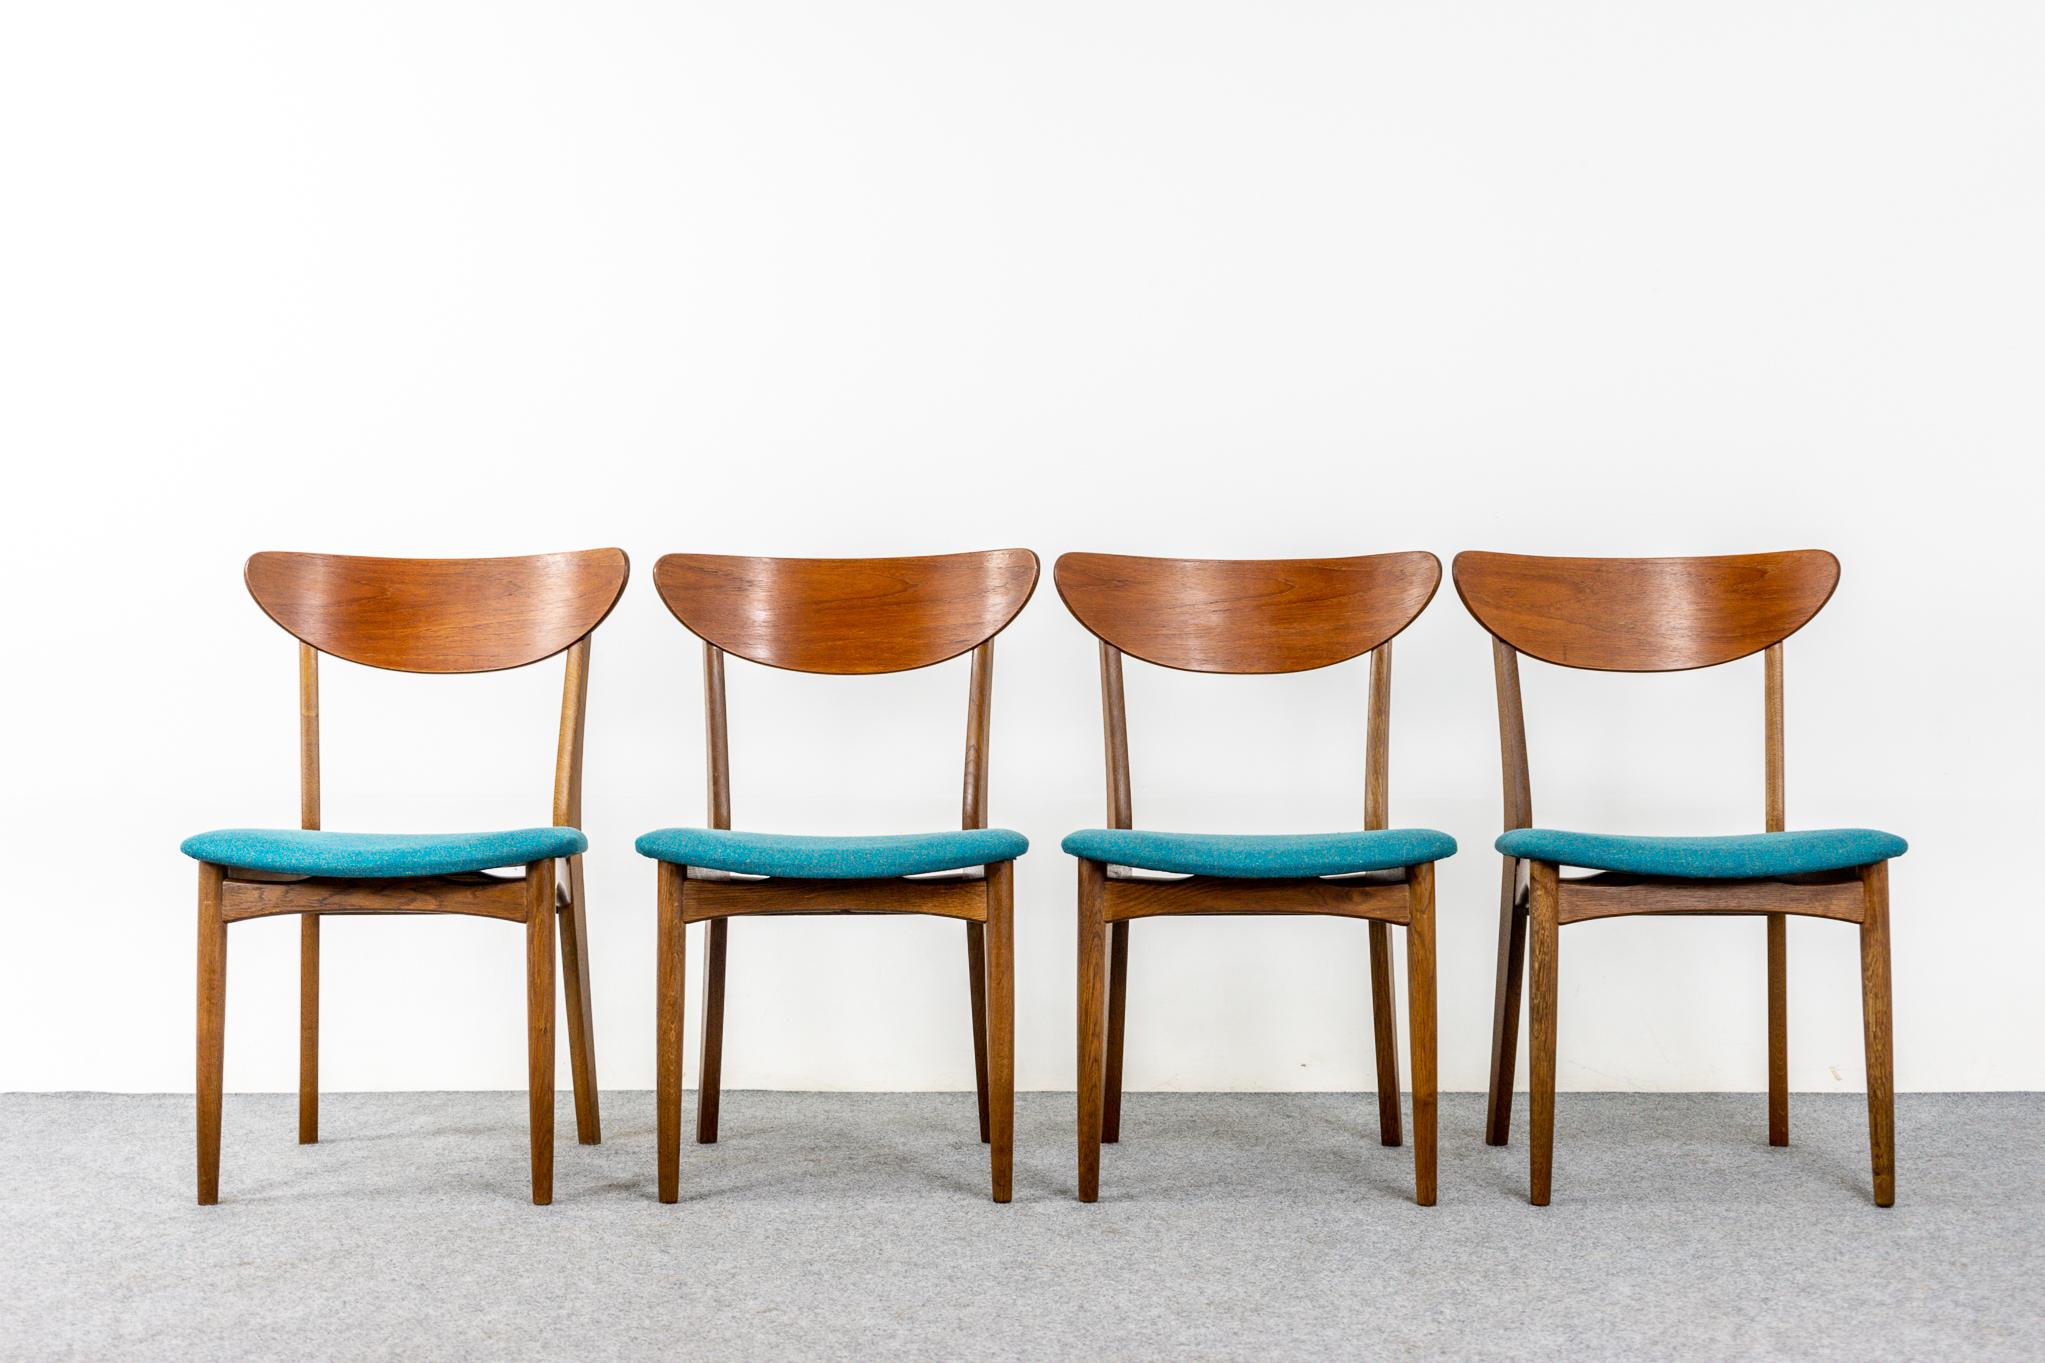 Teak & oak Danish dining chairs, circa 1960's. Beautifully curved backrests and generous seat design provide support and comfort. Solid wood legs feature cross braces for added stability and support. Floating seat design adds an air of lightness and